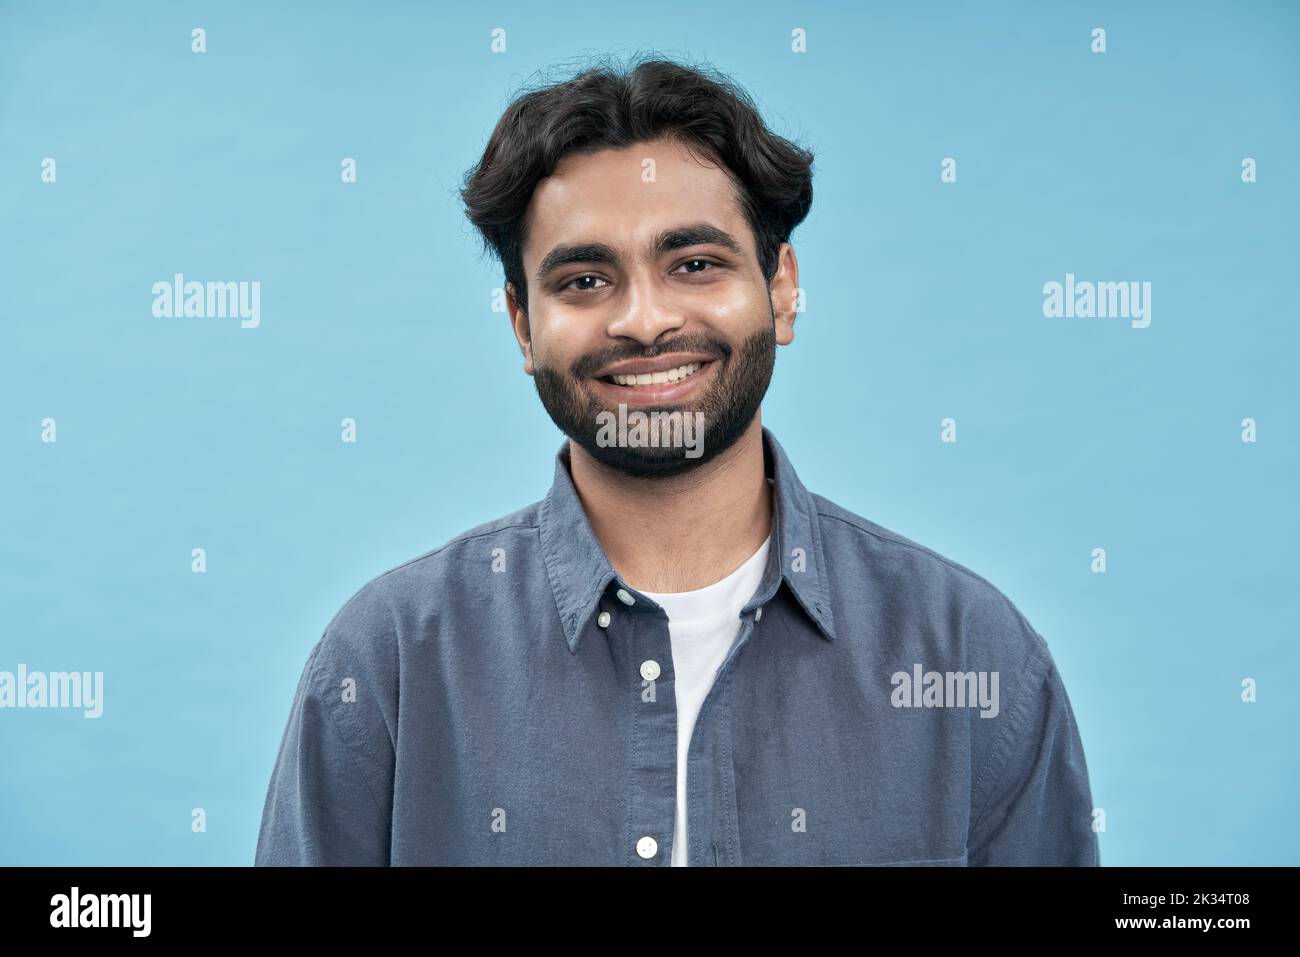 Smiling confident young arab man standing isolated on blue background. Stock Photo